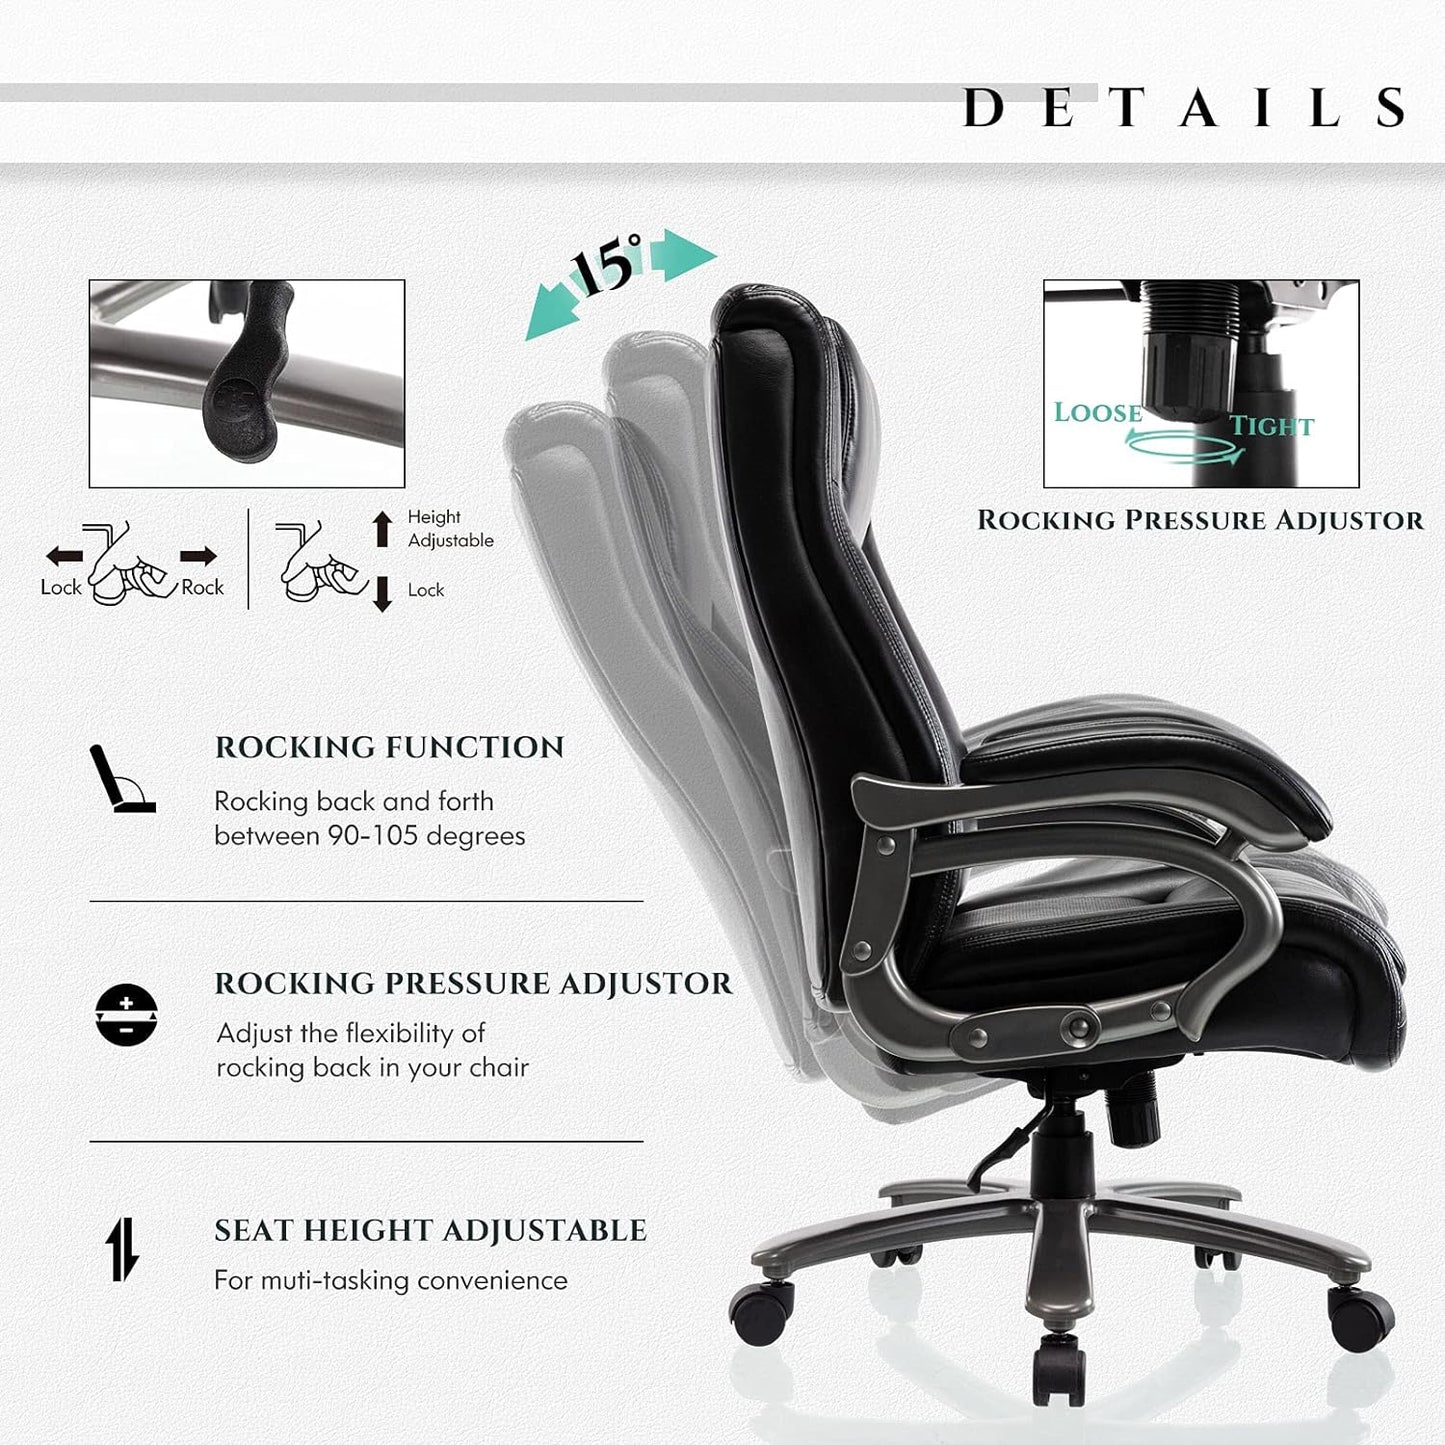 Big & Tall 400lb Office Chair - High Back Executive Computer Chair Heavy Duty Metal Base and Adjustable Tilt Angle Large Bonded Leather Desk Swivel Chair, Ergonomic Design for Lumbar Support